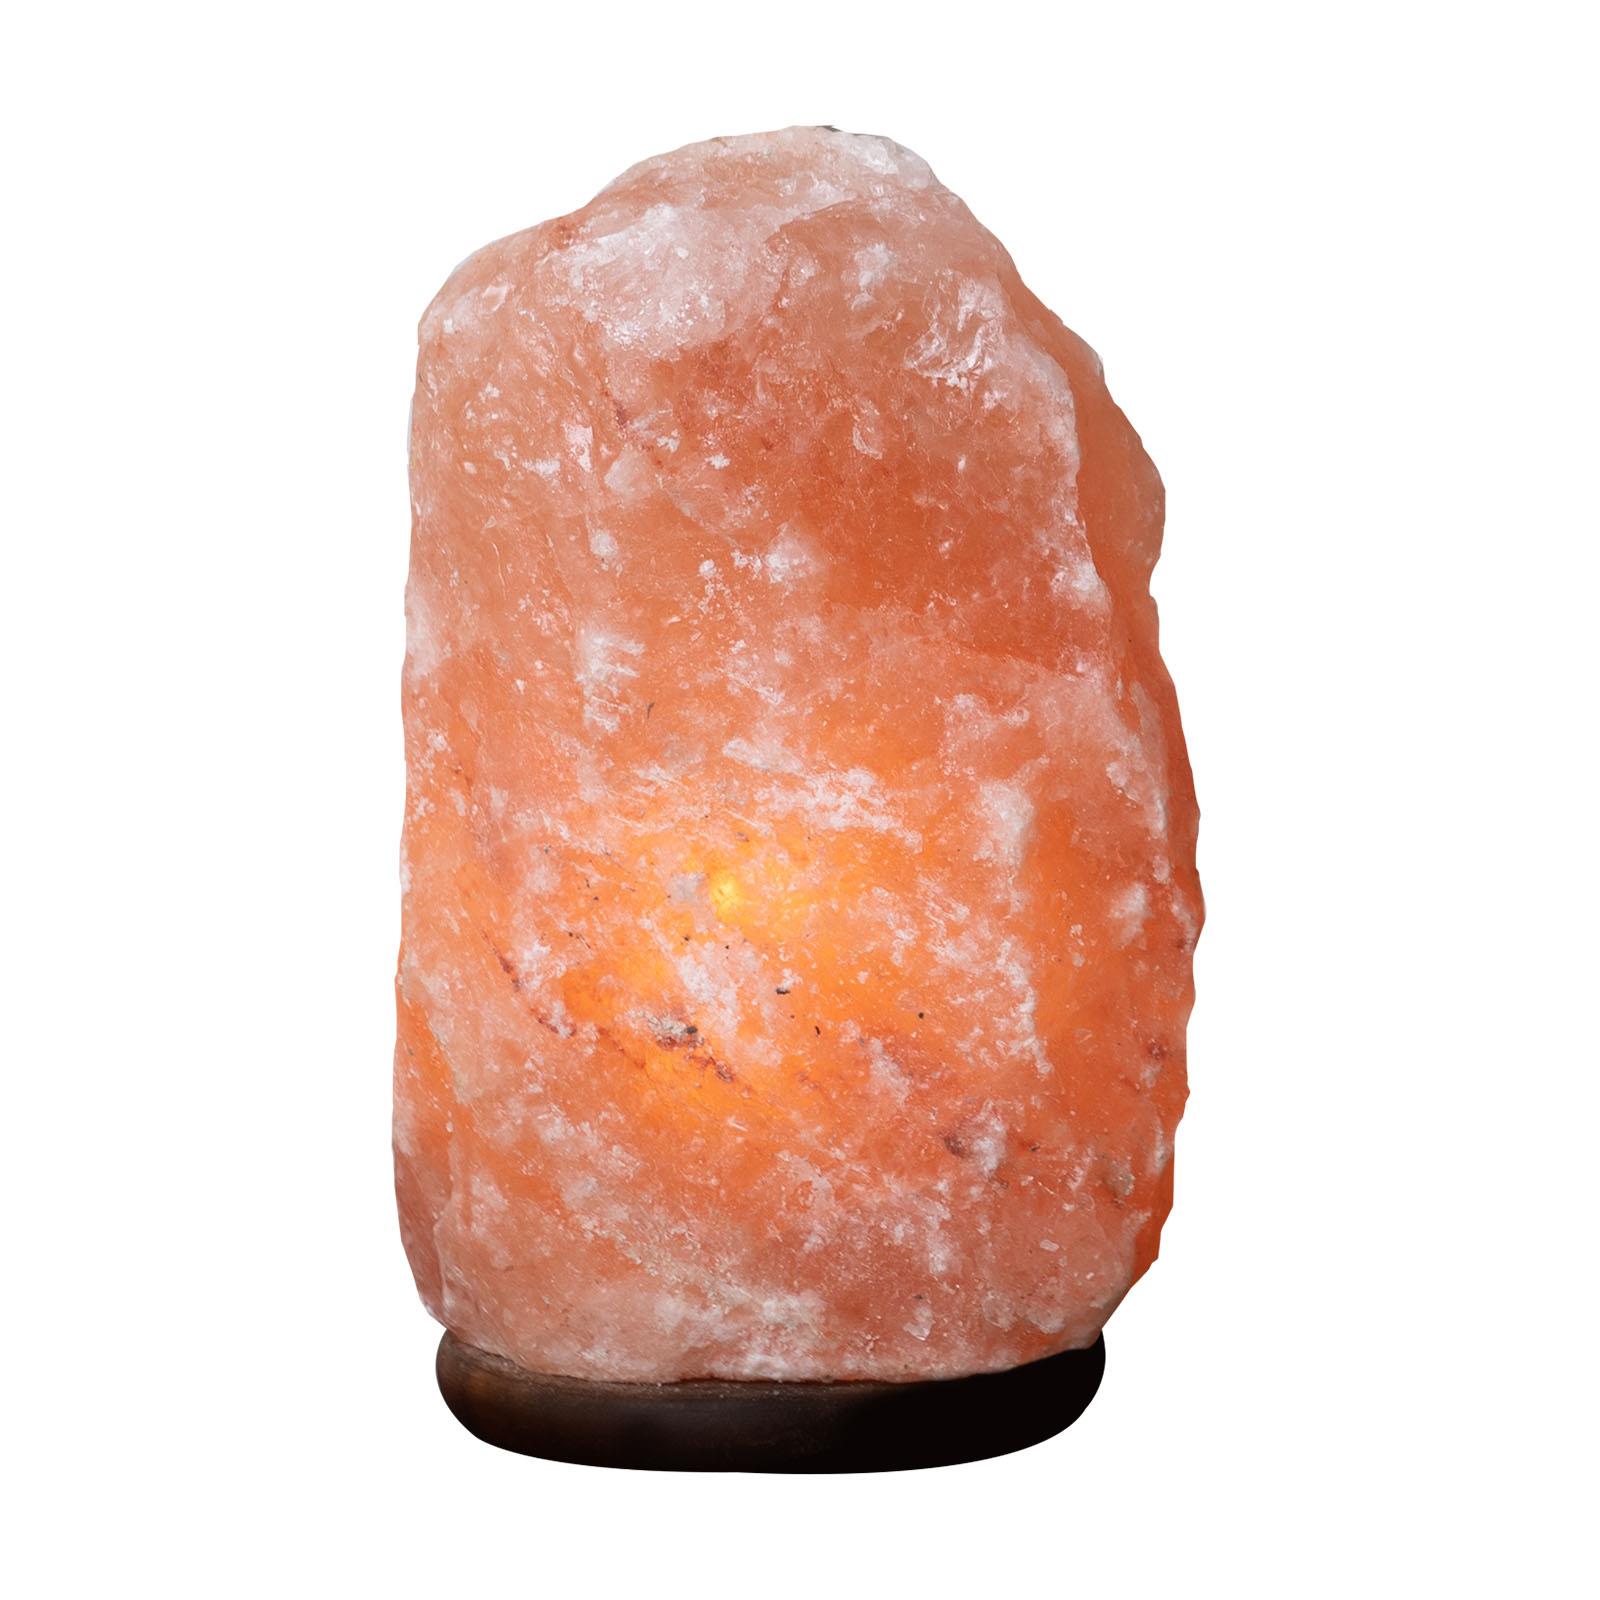 Haven Pink Himalayan Salt Lamp on a Premium Wooden Base – Natural Mood Light and Home Decor Accessory (Extra Large 5kg – 6kg)